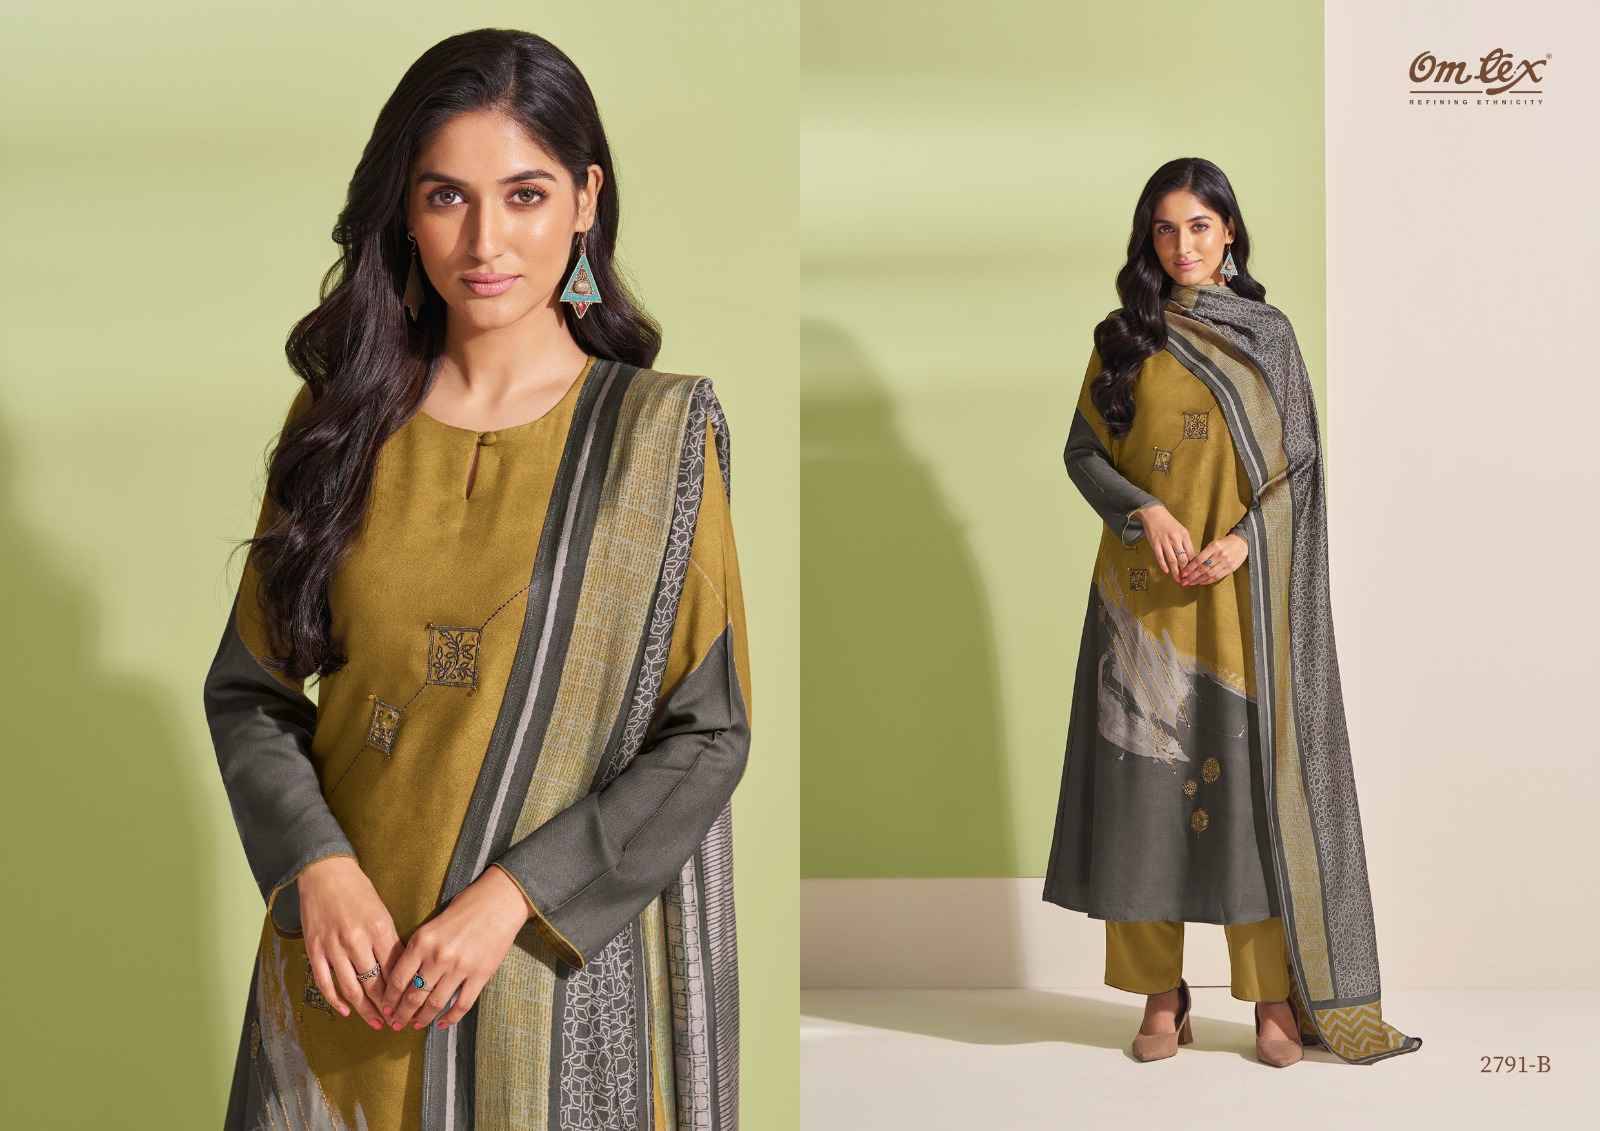 Saachi By Om Tex 2791-A To 2791-D Series Beautiful Stylish Festive Suits Fancy Colorful Casual Wear & Ethnic Wear & Ready To Wear Pure Pashmina Digital Print Dresses At Wholesale Price